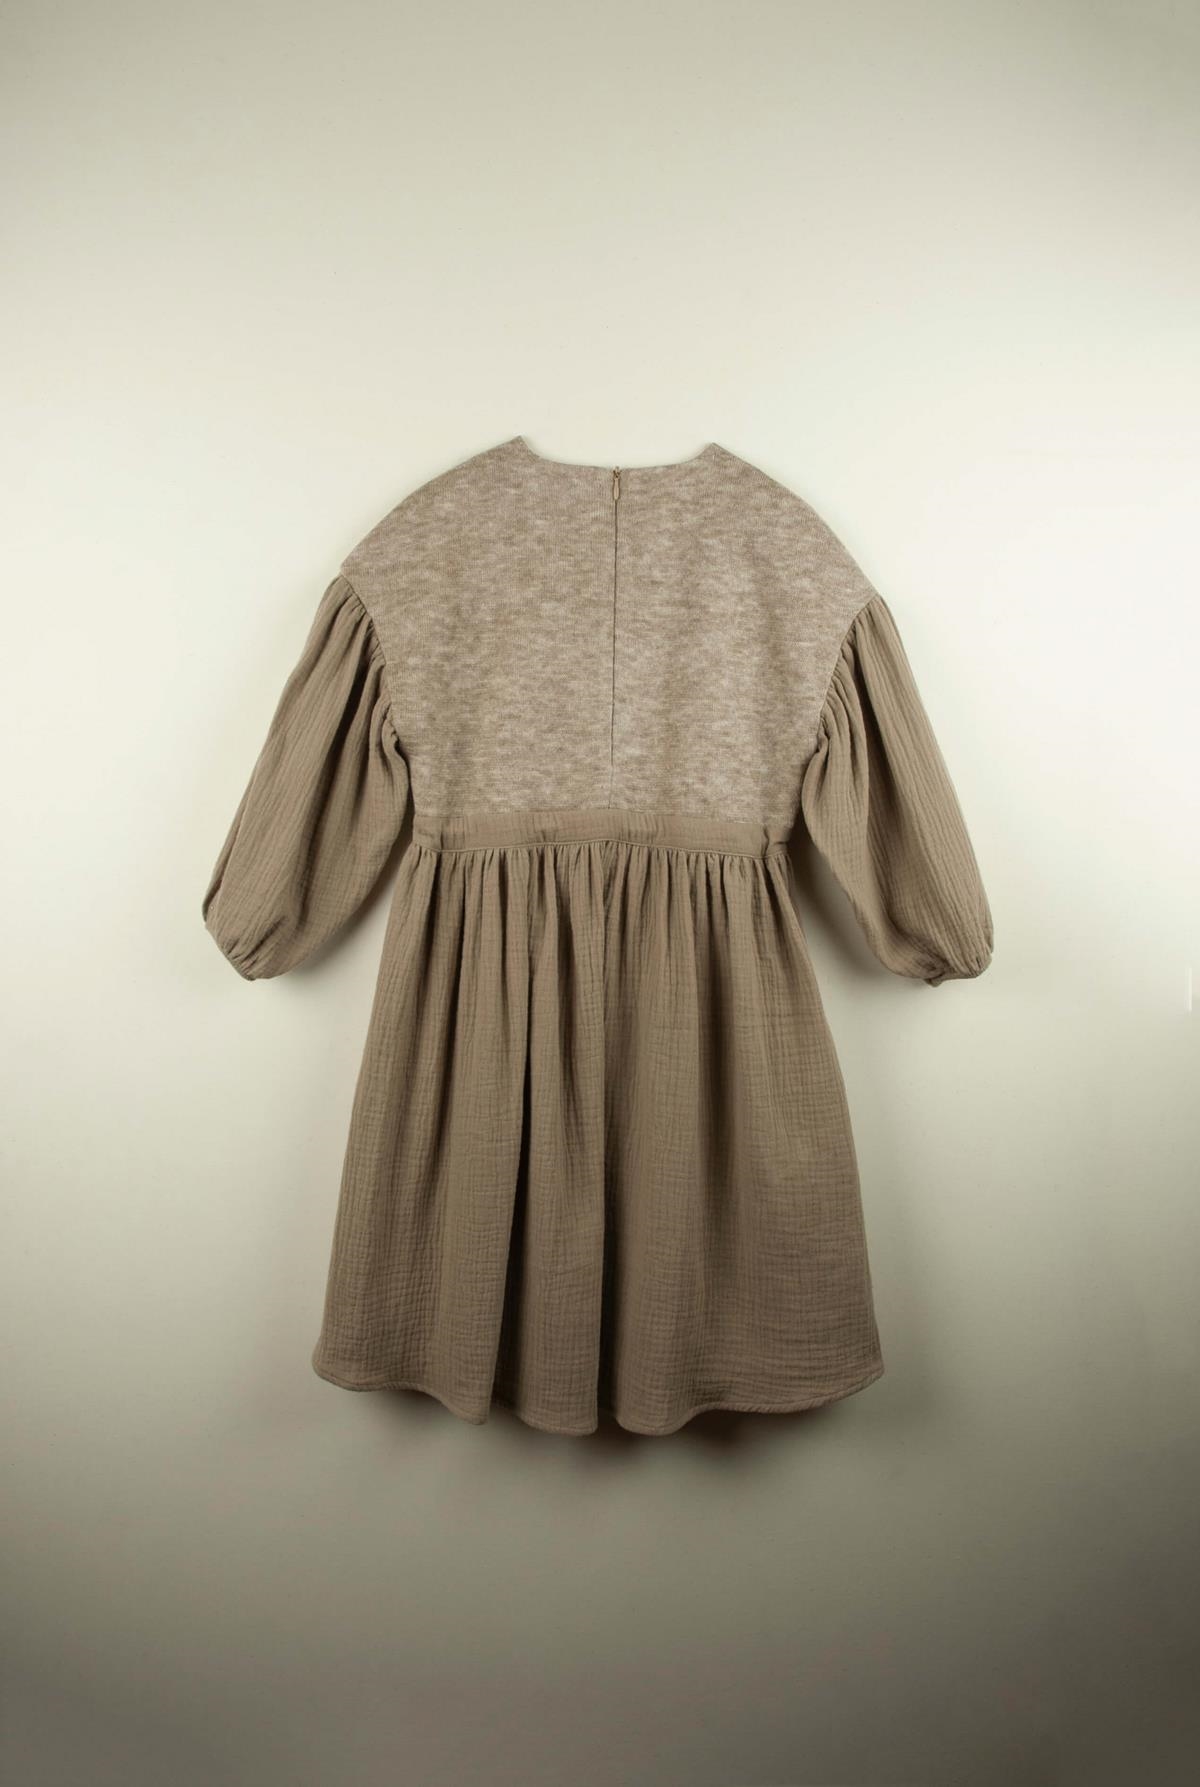 Mod.32.1 Taupe dress with embroidered sides | AW21.22 Mod.32.1 Taupe dress with embroidered sides | 1